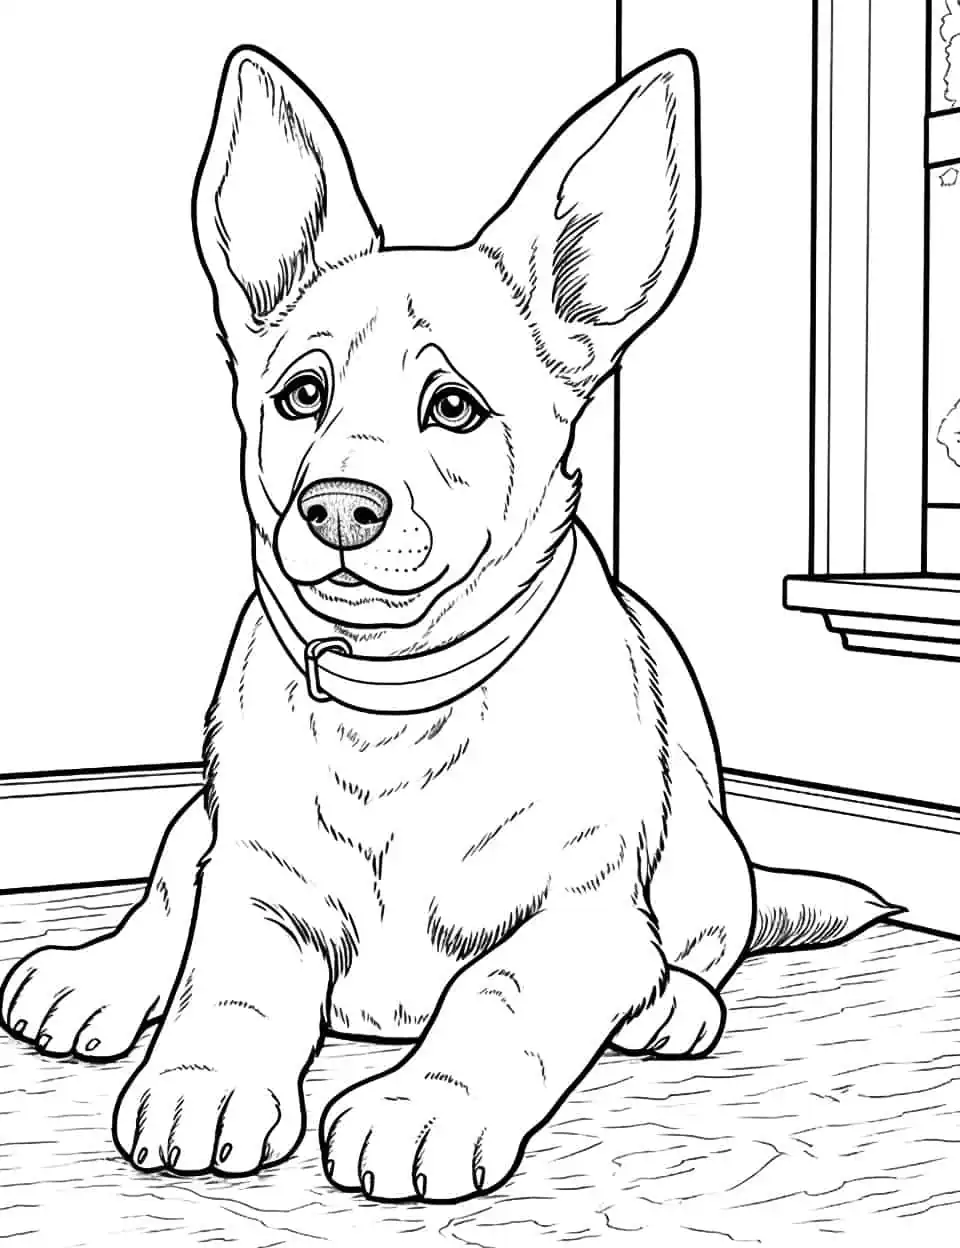 German Shepherd's Day Off Dog Coloring Page - A German Shepherd enjoying a day off at home, lounging on a cozy rug.